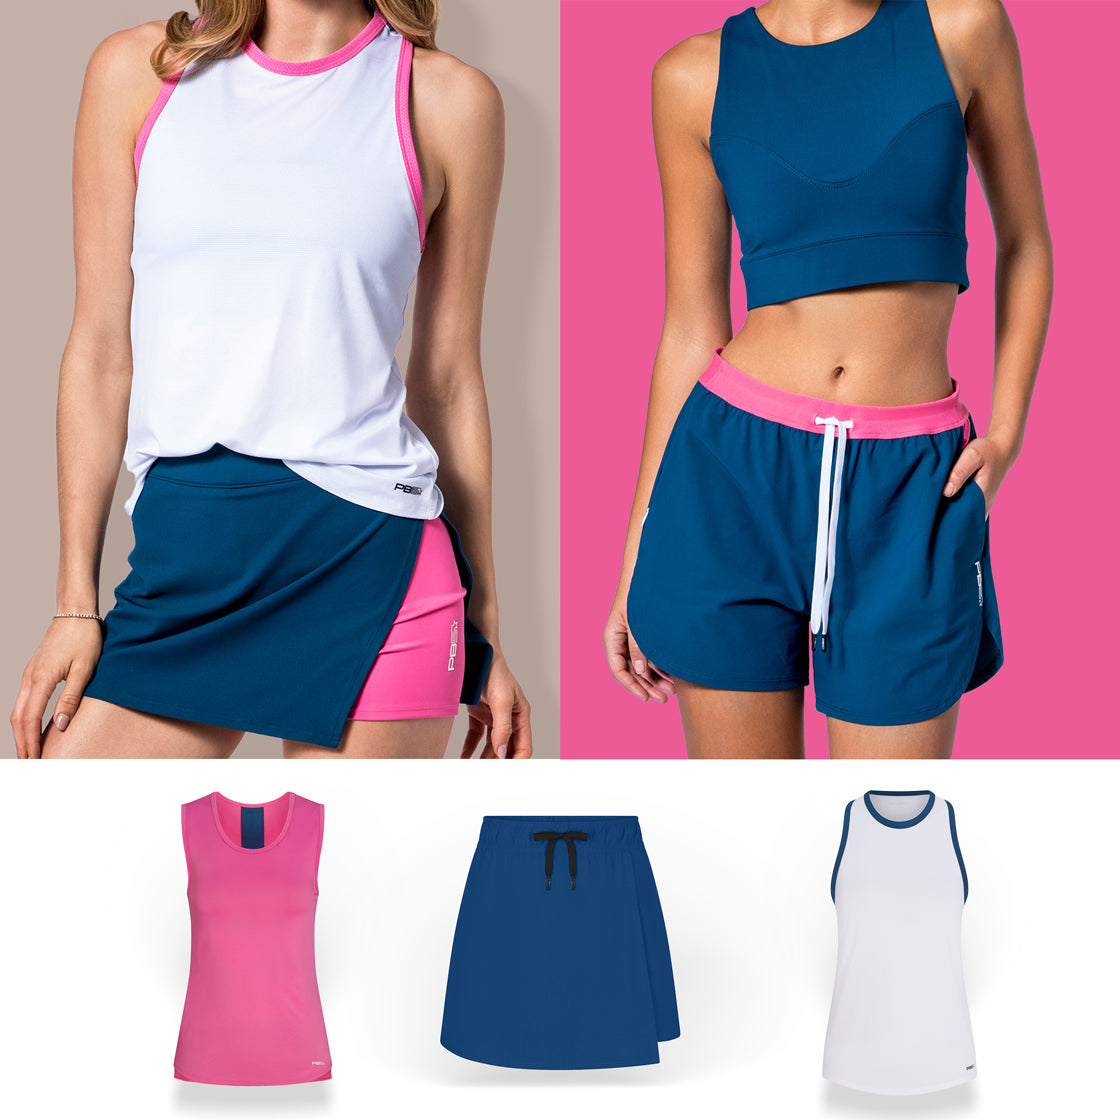 Collage of women's PB5star performance apparel in the colors white, astral blue and pink.